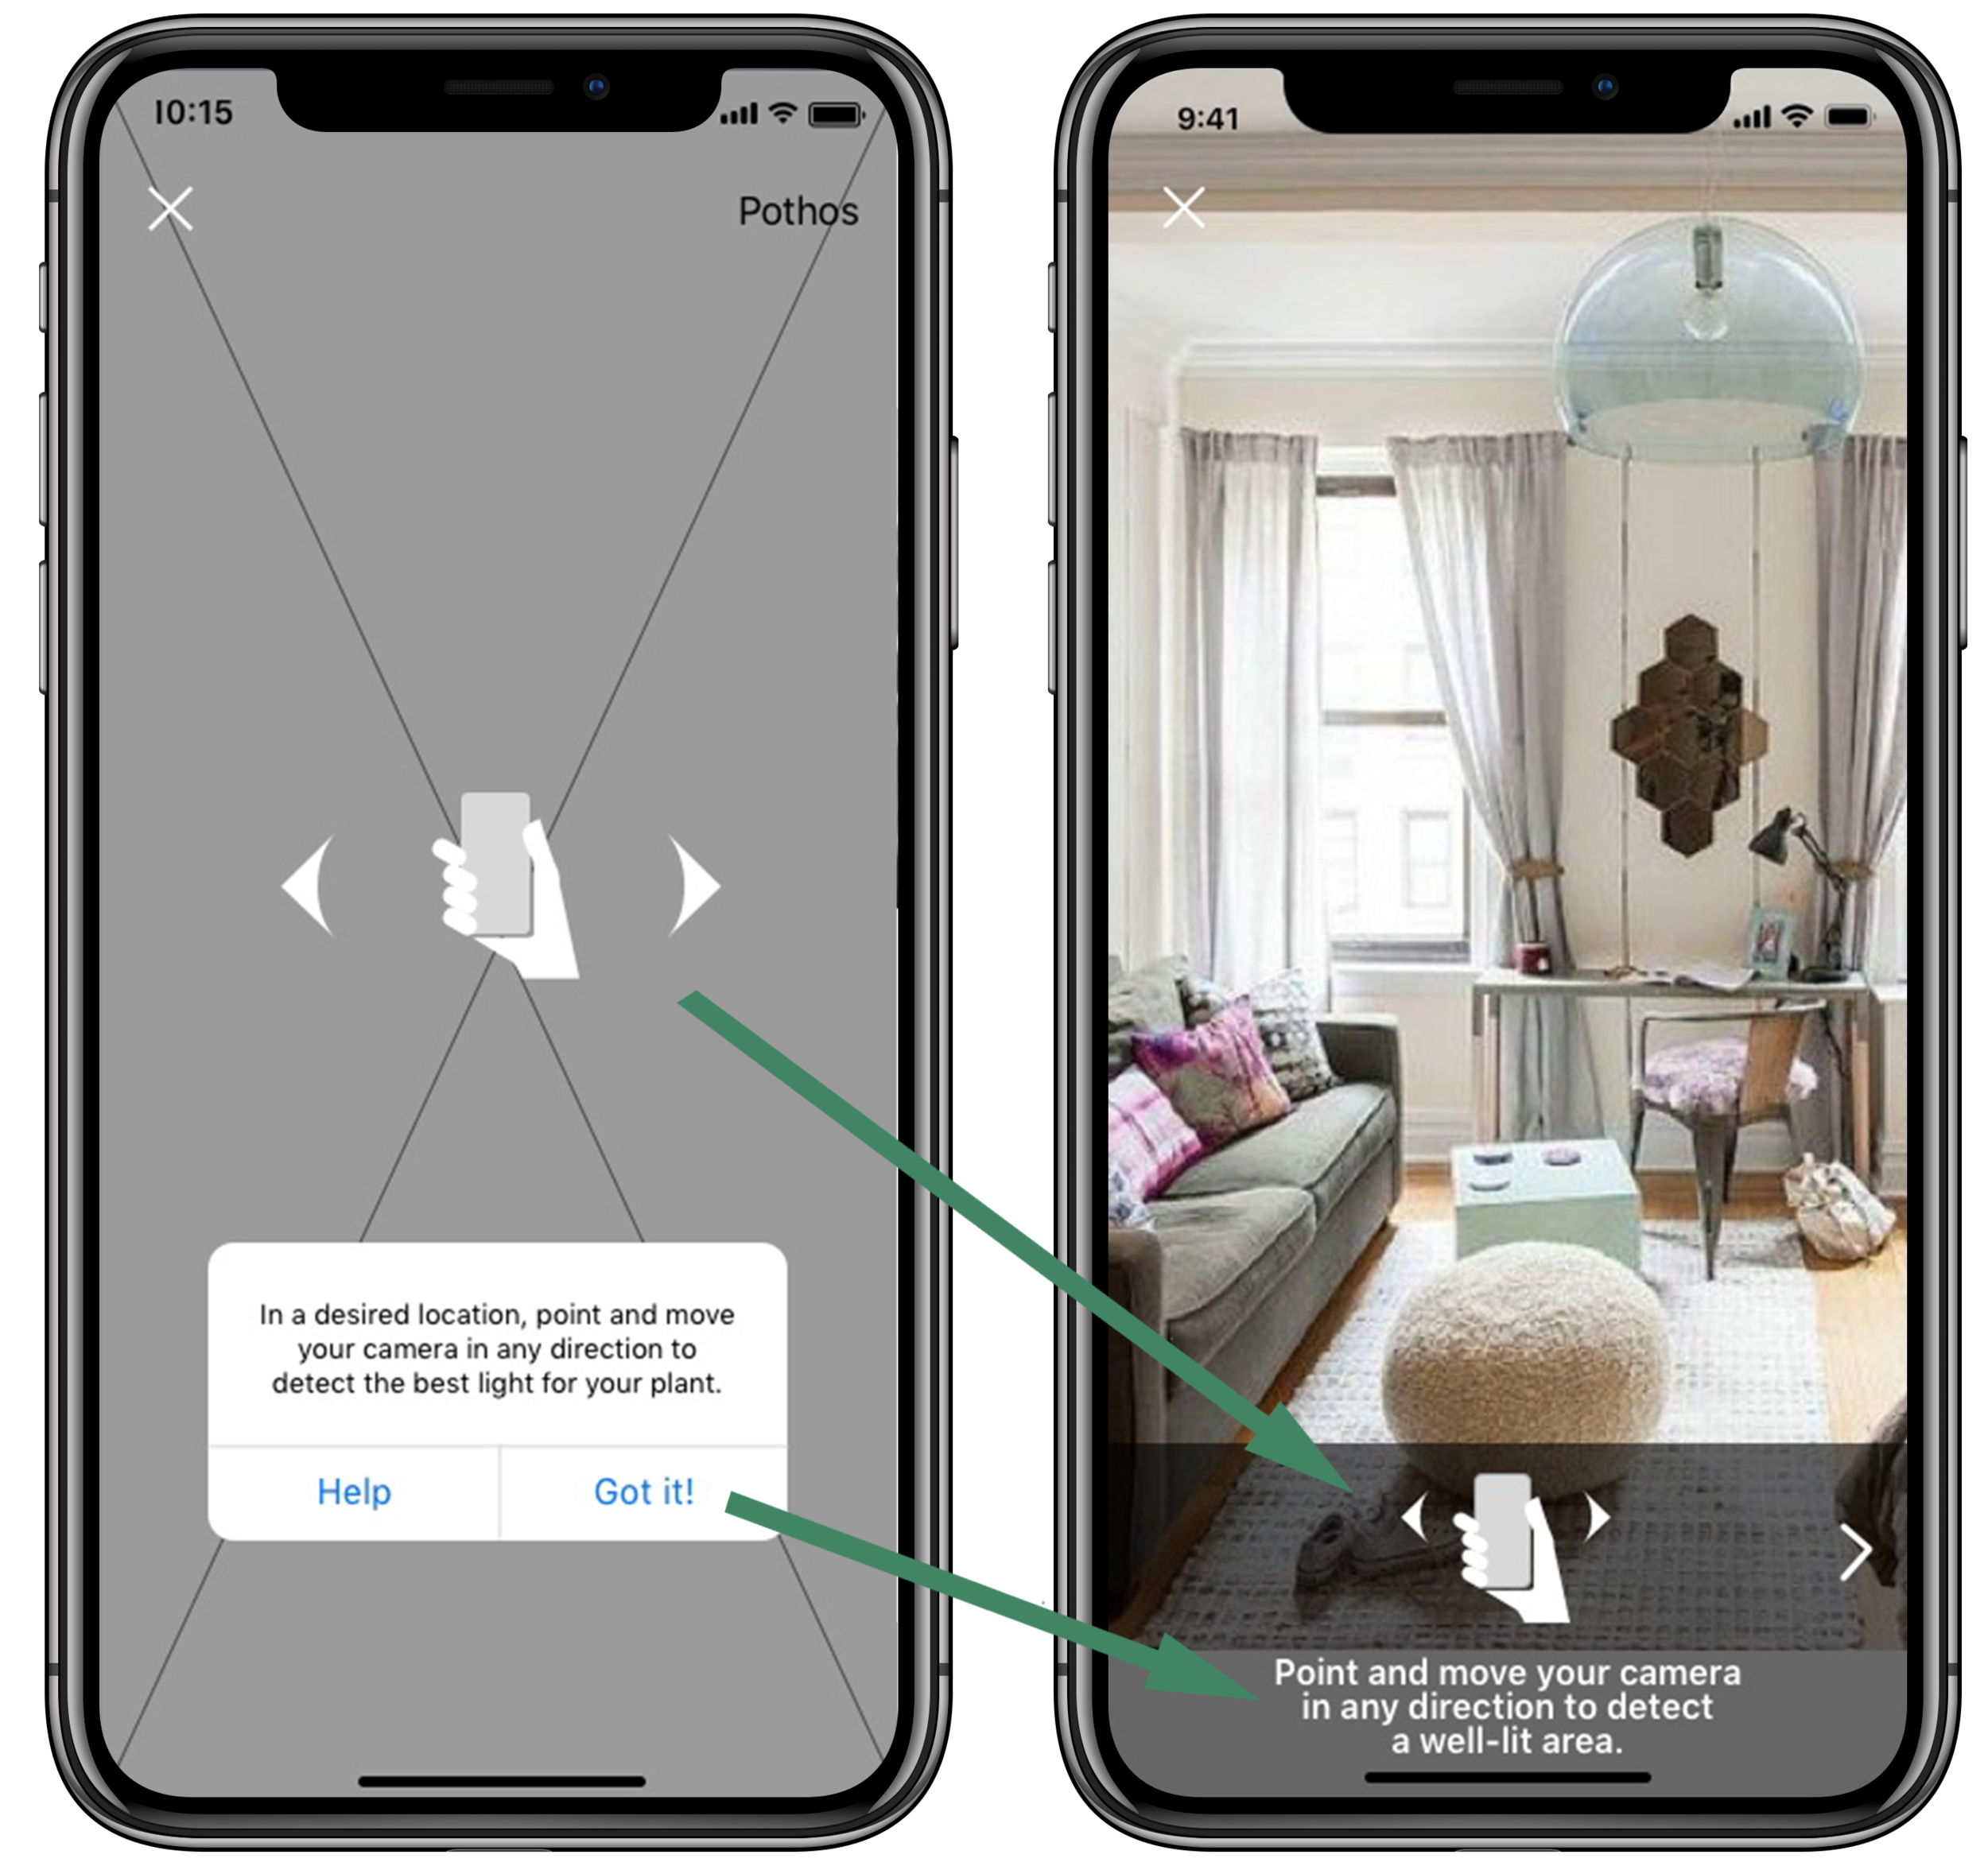  3) Copy for AR instructions was too long and the visual appeal was dull, so users didn’t take time to read them in testing. We edited the copy and redesigned the interface. 